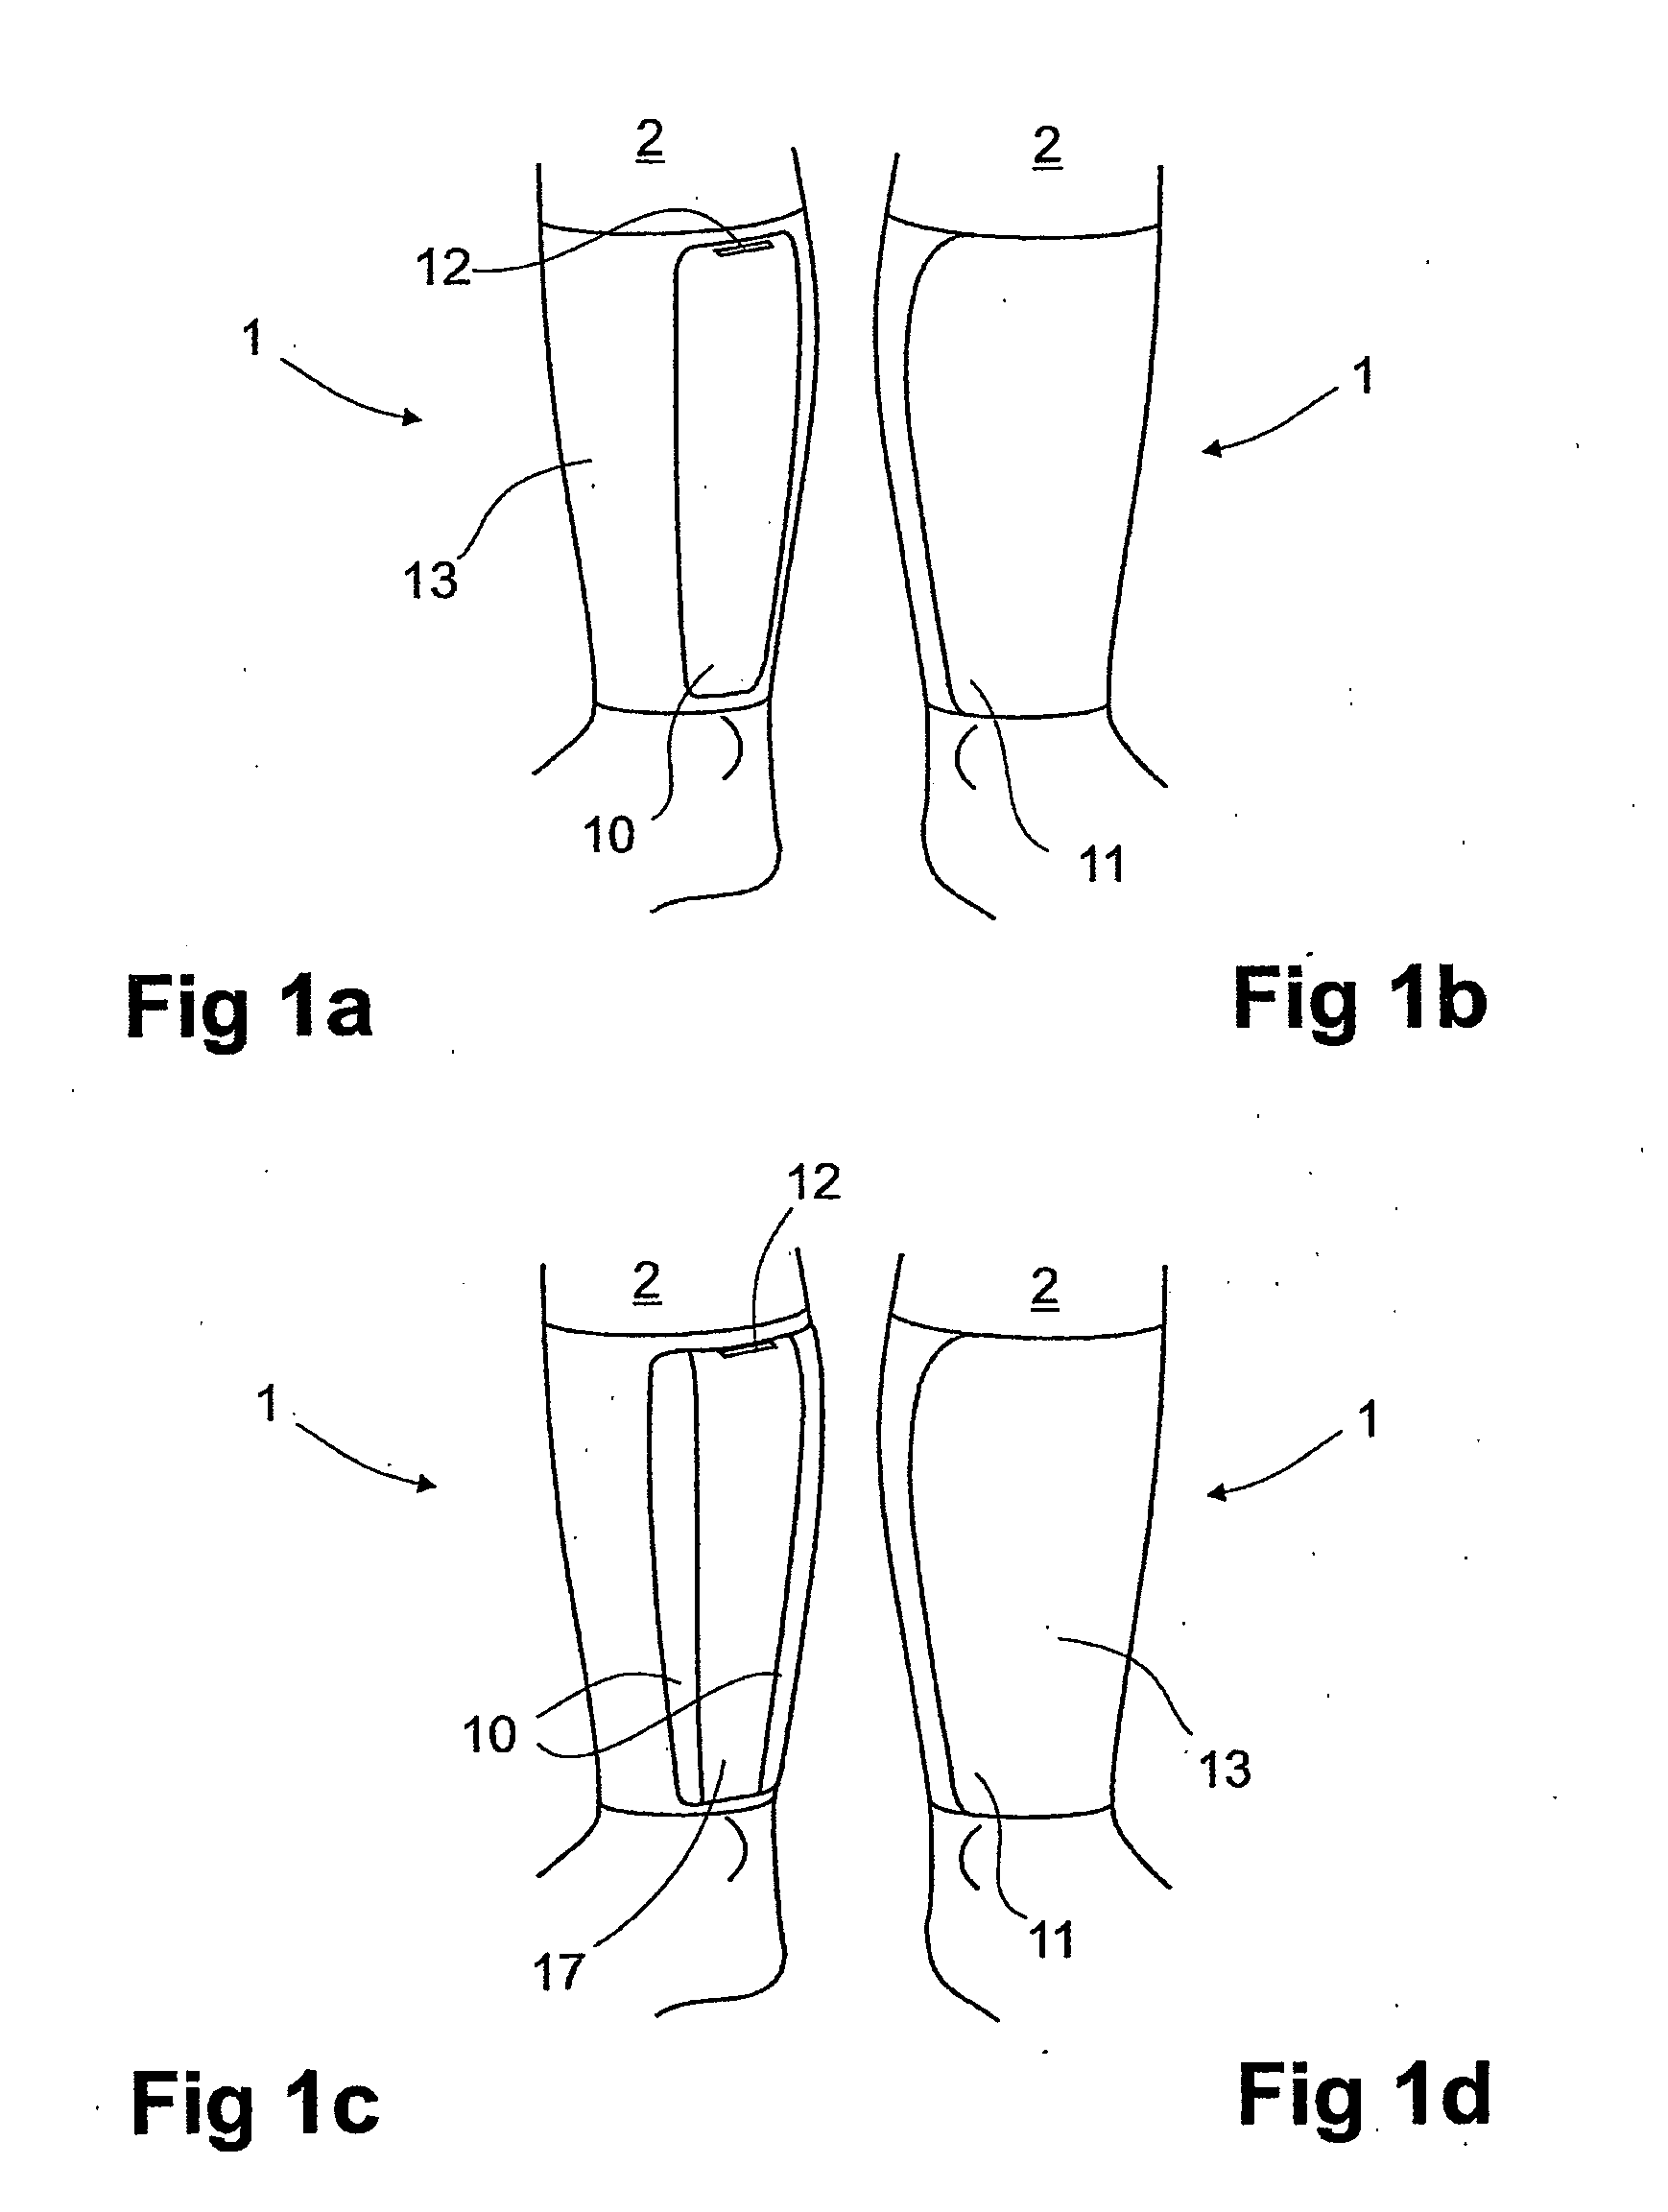 Device, system and method for compression treatment of a body part